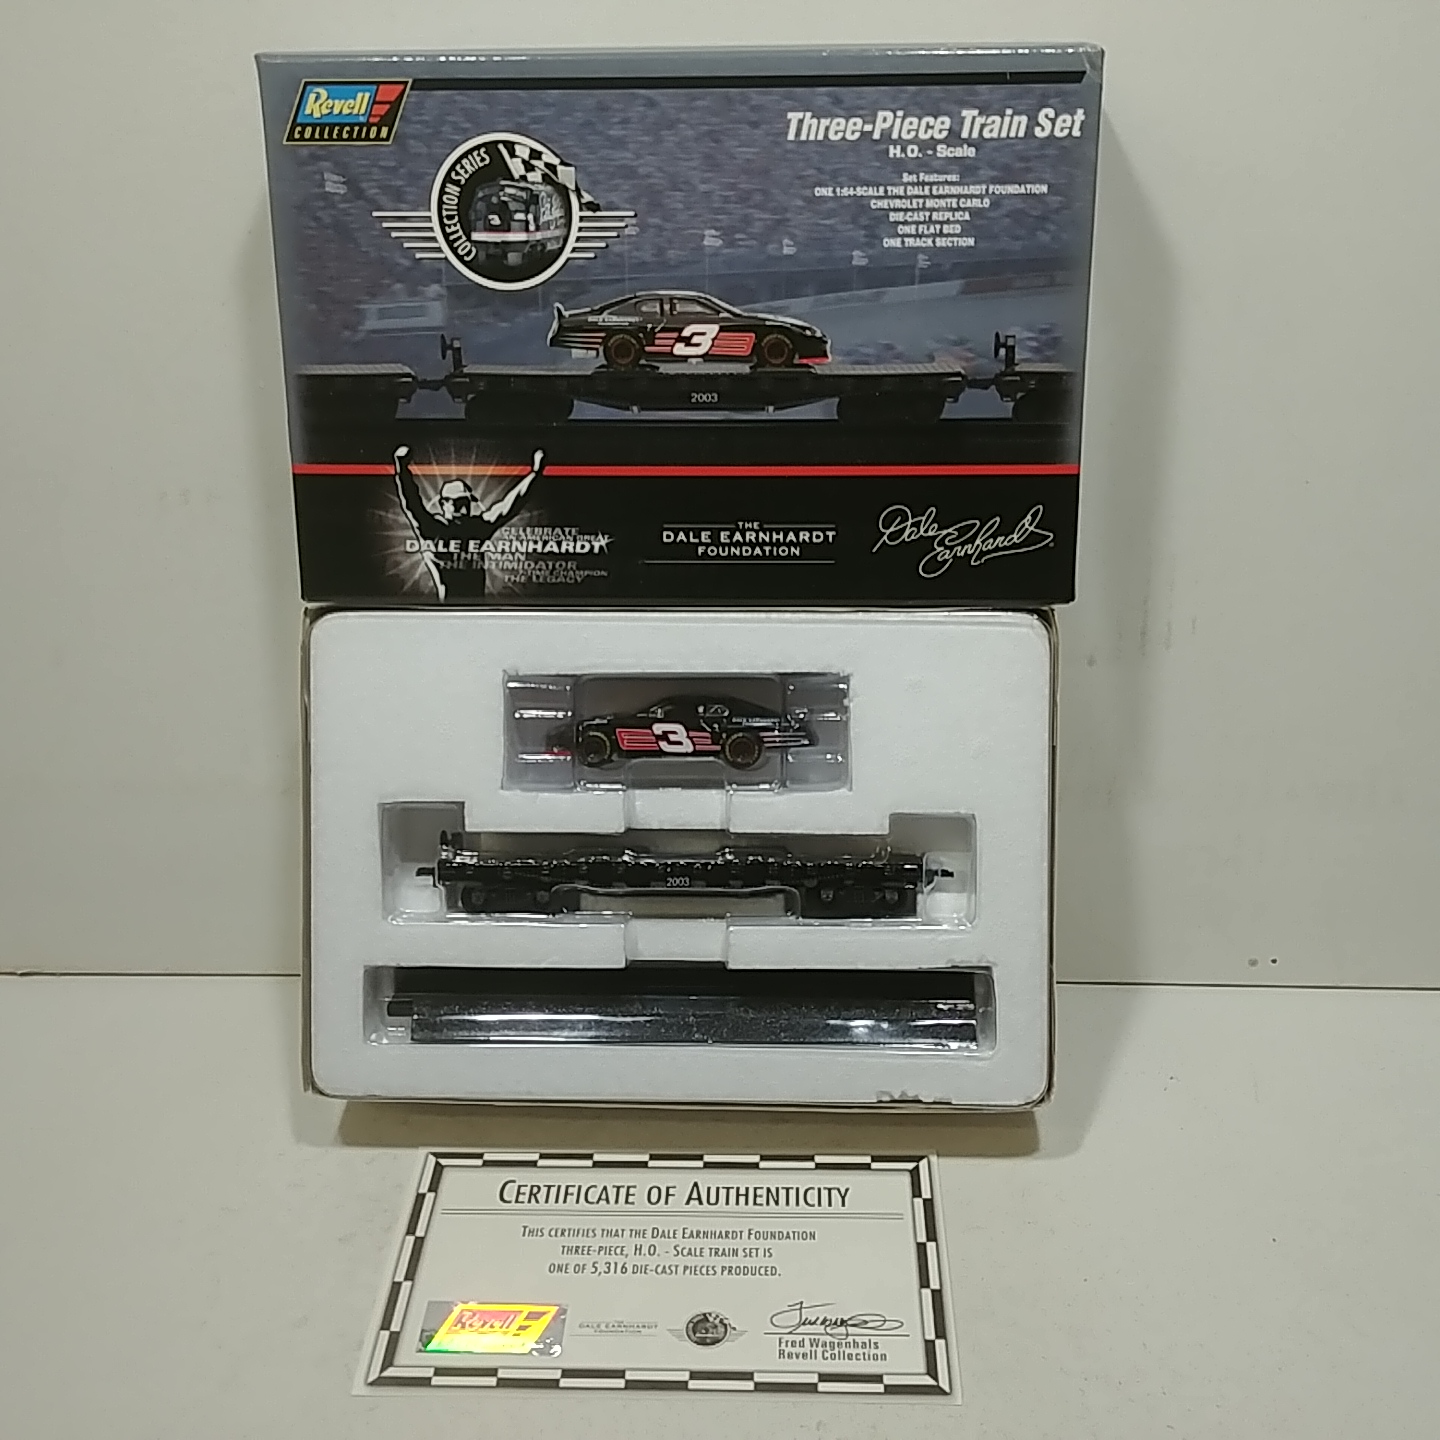 2003 Dale Earnhardt 1/64th Foundation flat car with Monte Carlo add on